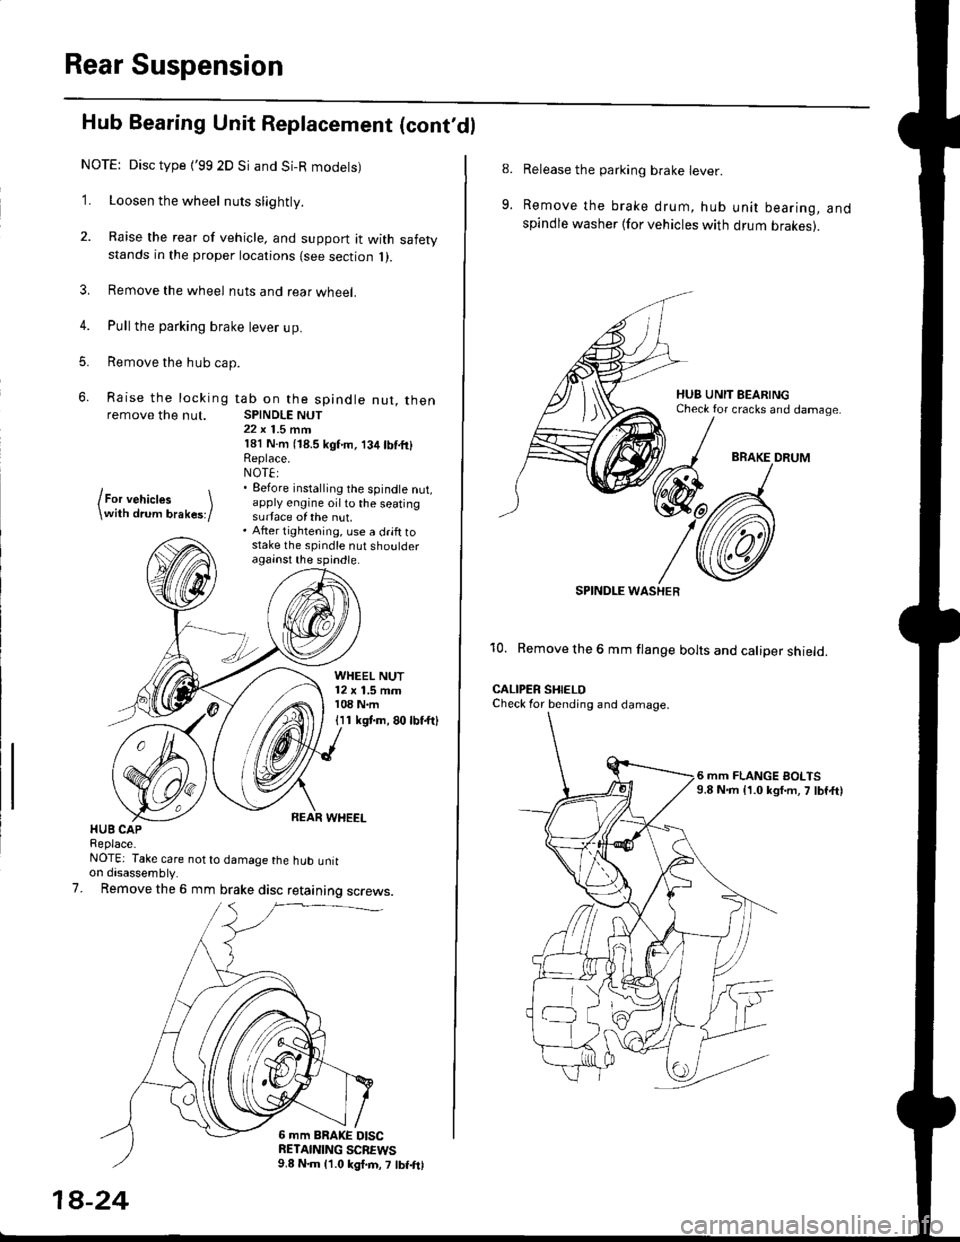 HONDA CIVIC 1998 6.G Workshop Manual Rear Suspension
Hub Bearing Unit Replacement (contdl
NOTE: Disc type {99 2D Si and Si-R modets)
1. Loosen the wheel nuts slightly.
2. Raise the rear of vehicle, and support it with safetystands in t